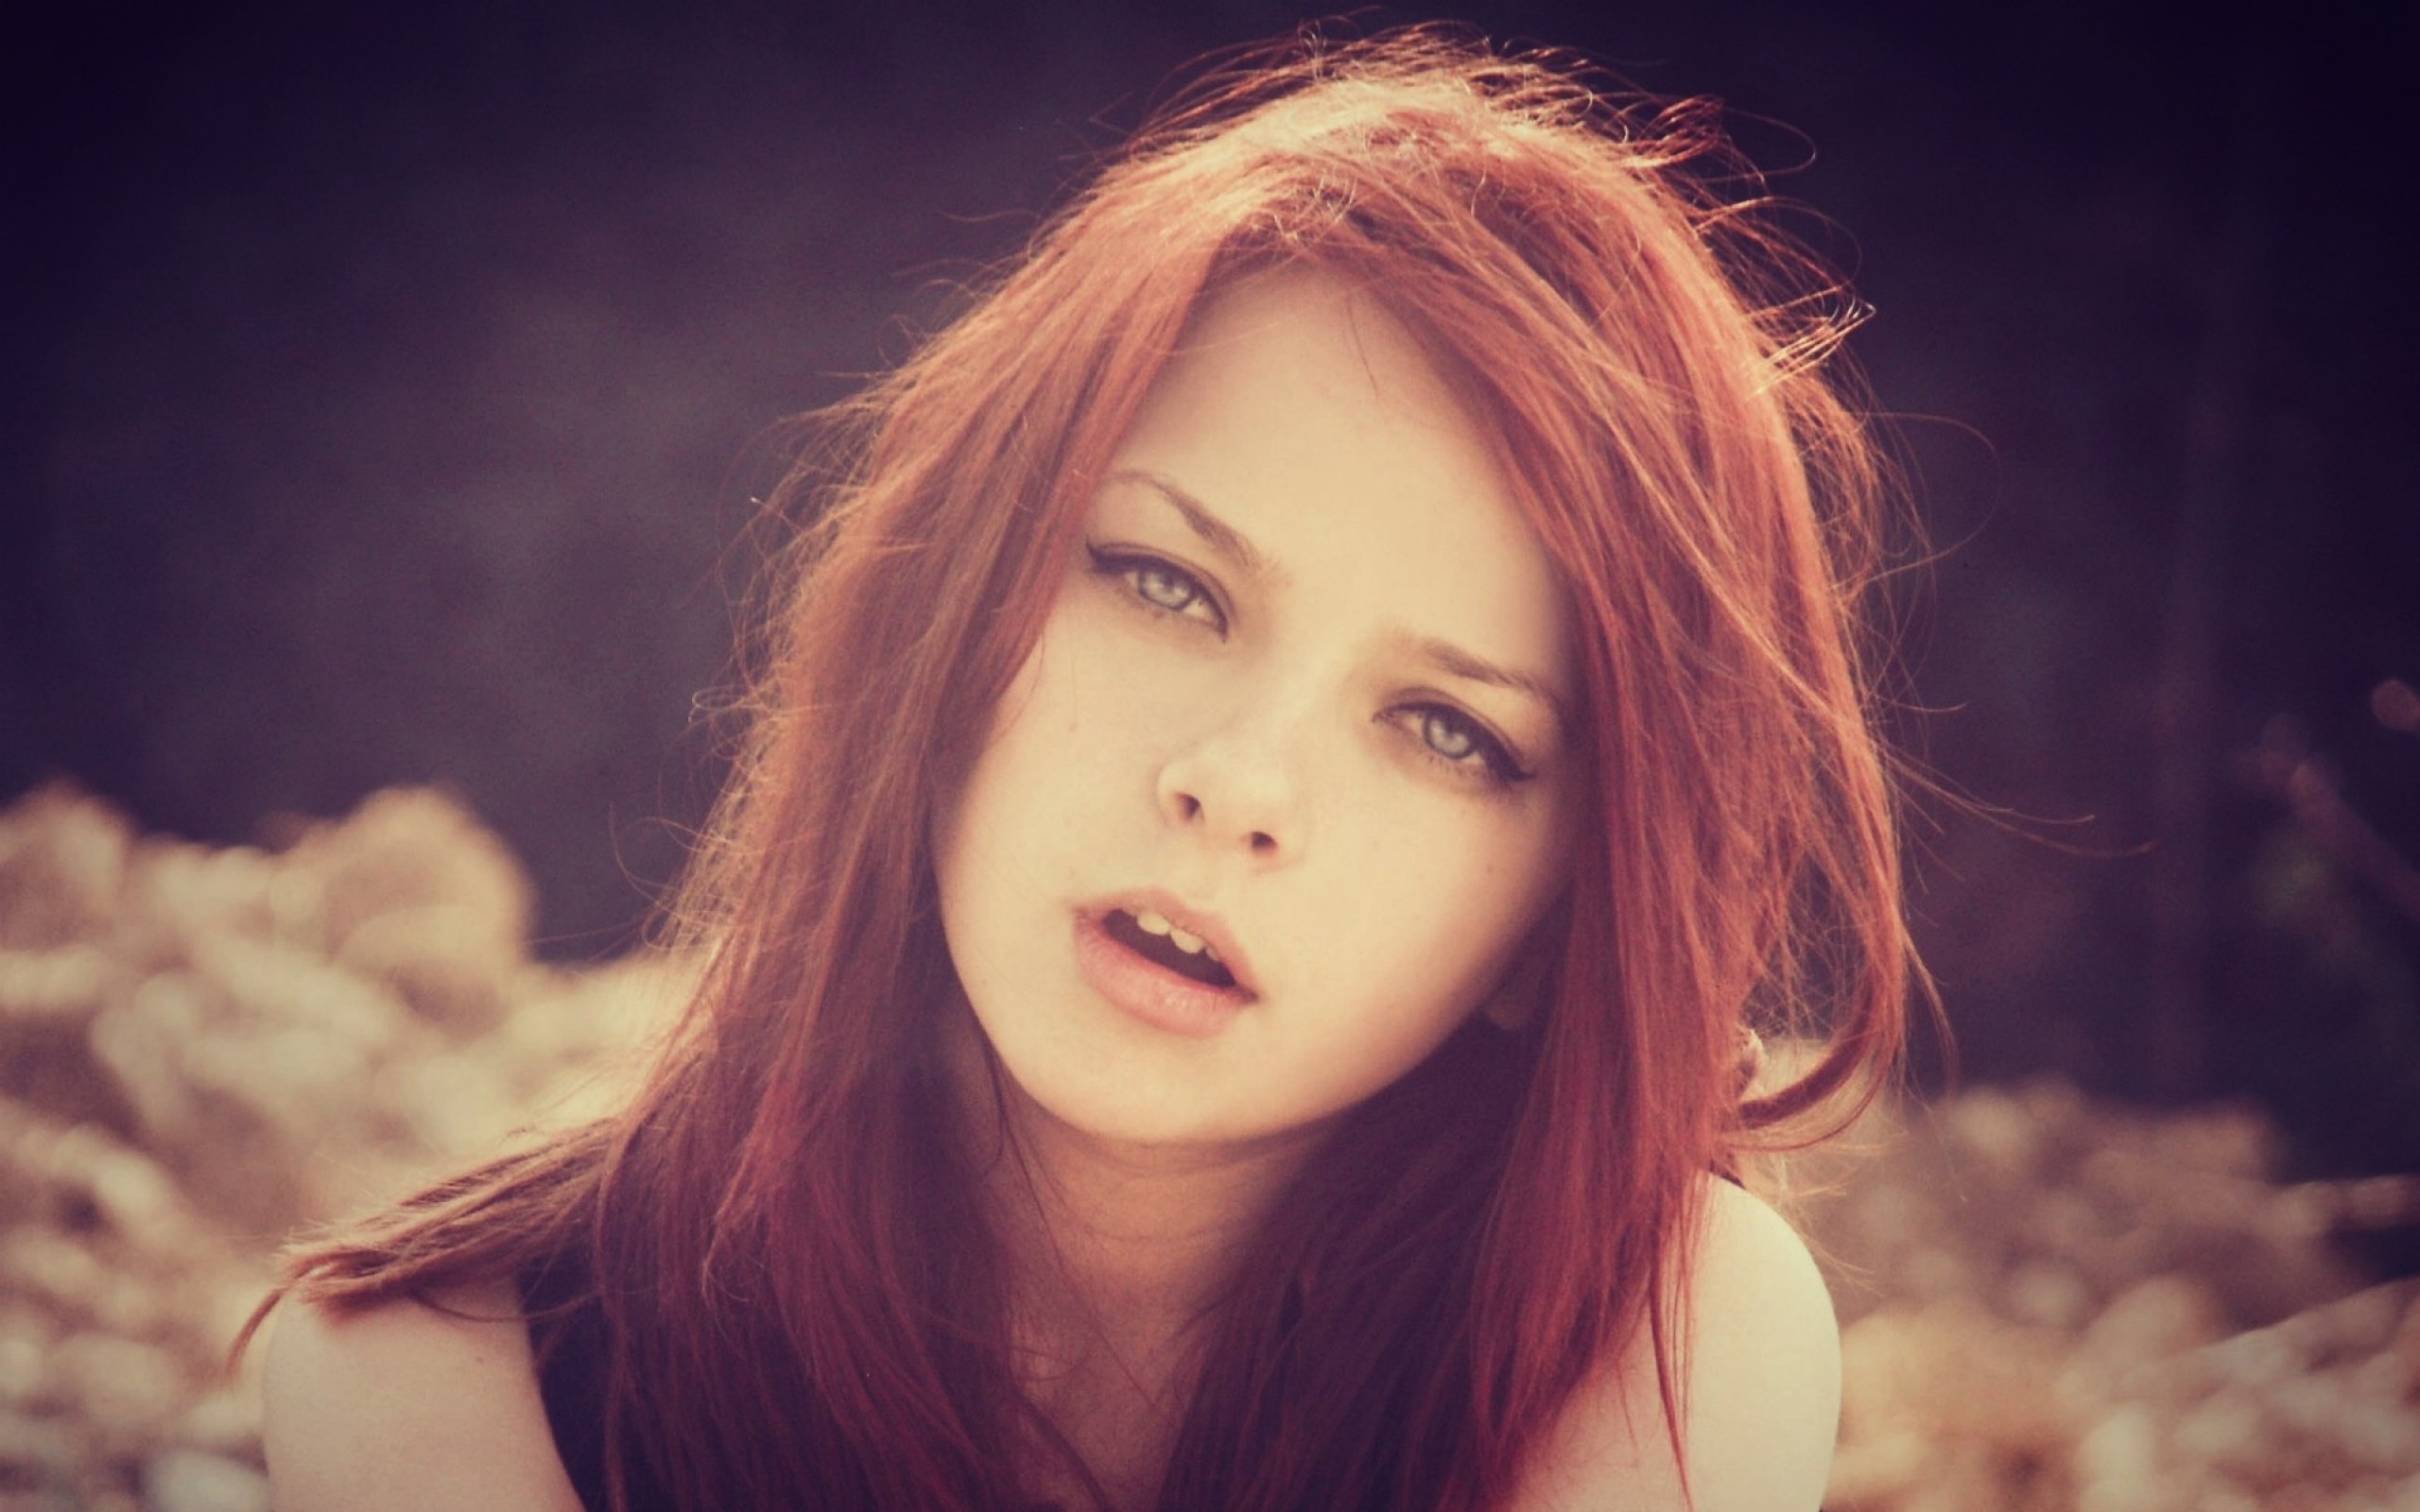 2560x1600 Redhead Model wallpapers and stock photos